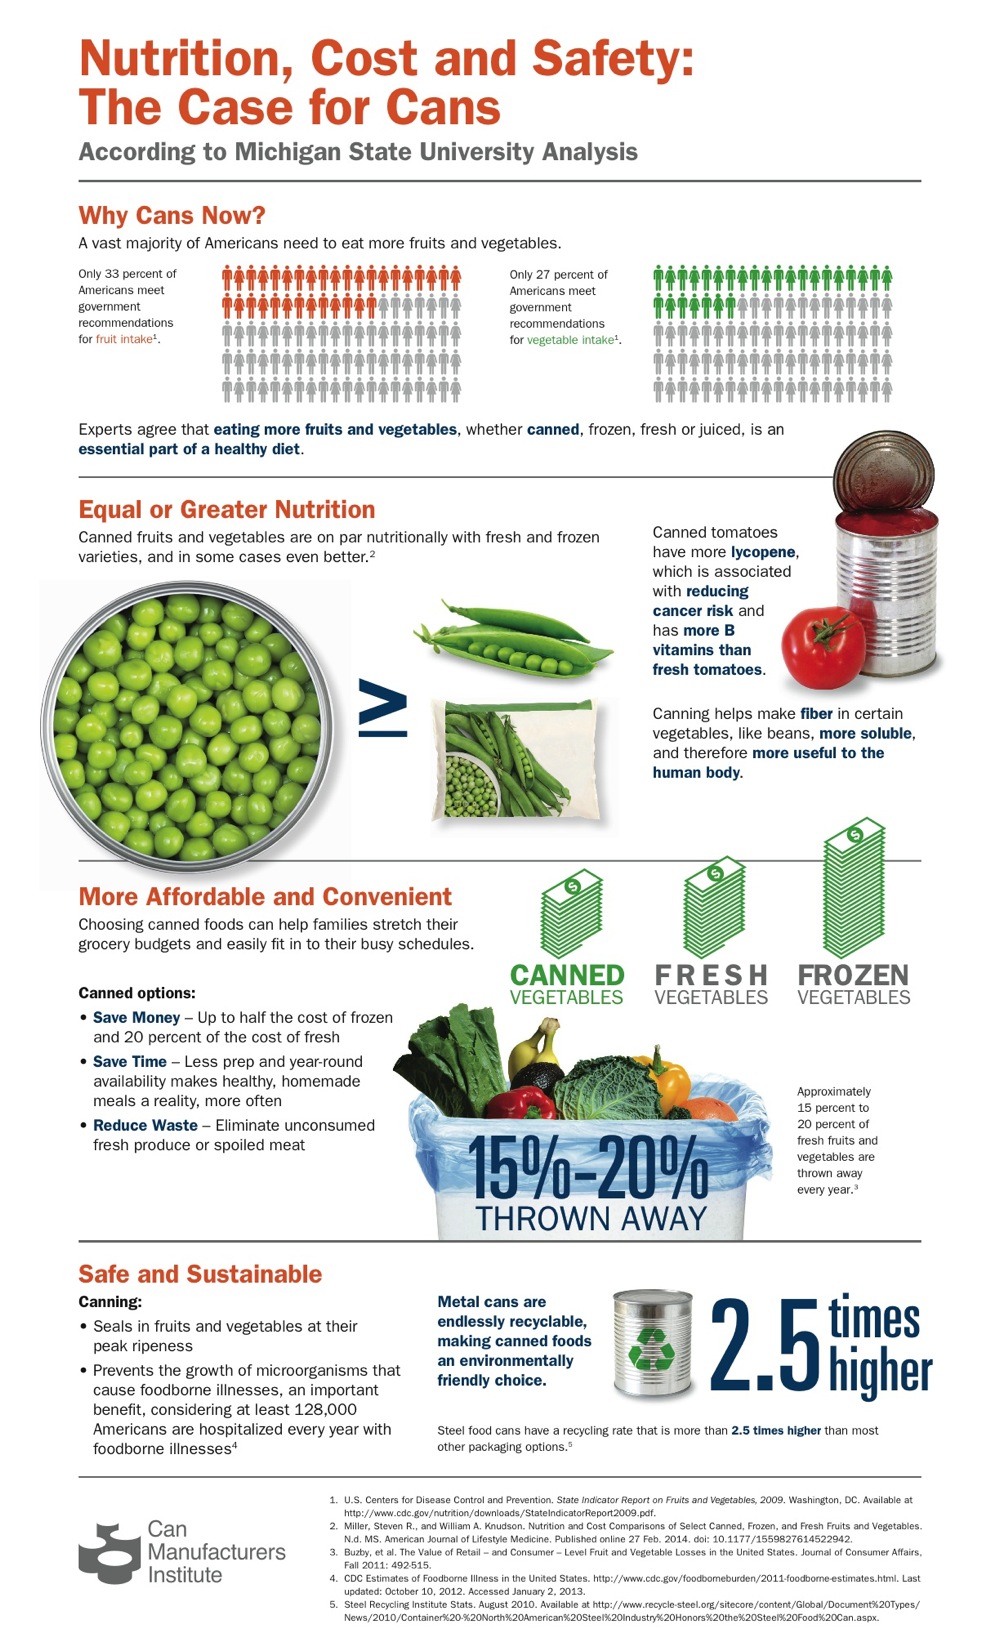 MSU canned info graphic